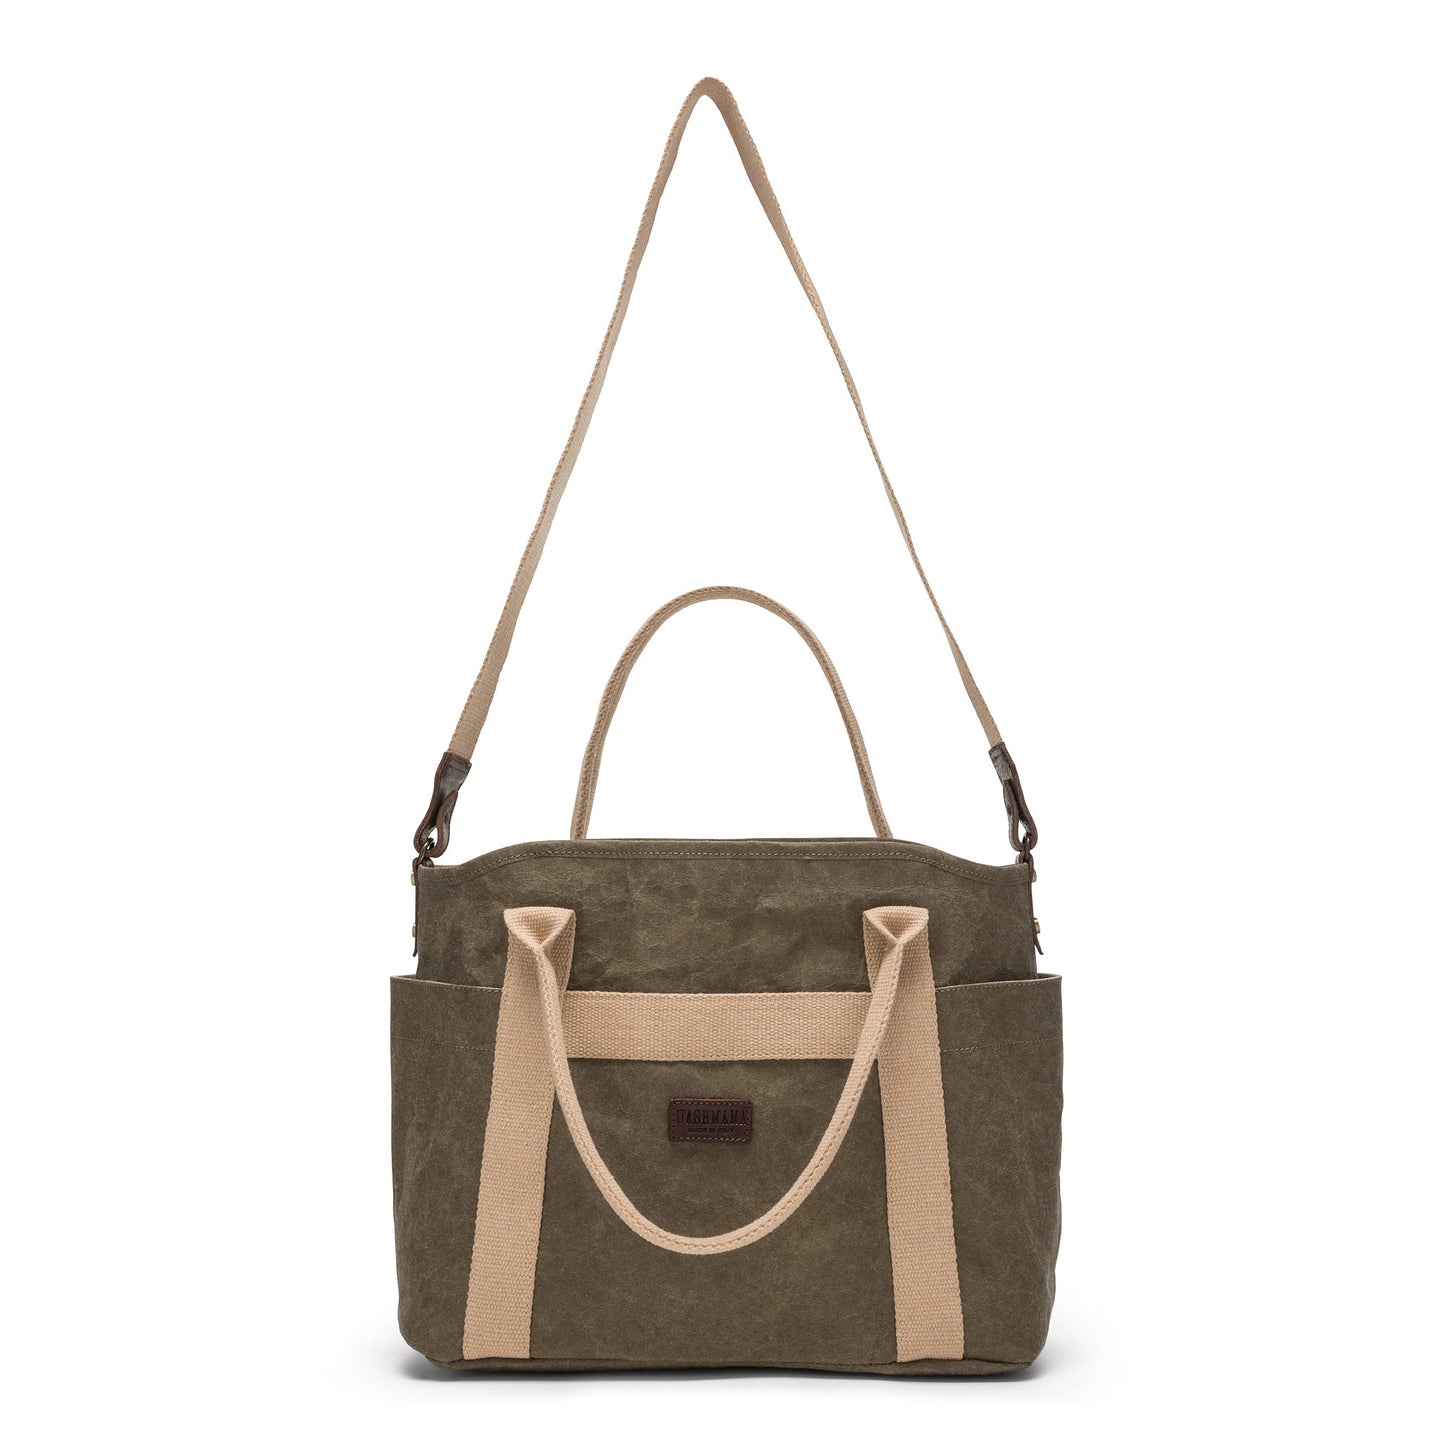 A large washable paper shopper bag is shown from a front angle. It features a long canvas shoulder strap and two top handles. It has an external pocket running the length of the bag, and the UASHMAMA logo stamped in the front. It is shown in a khaki colour.